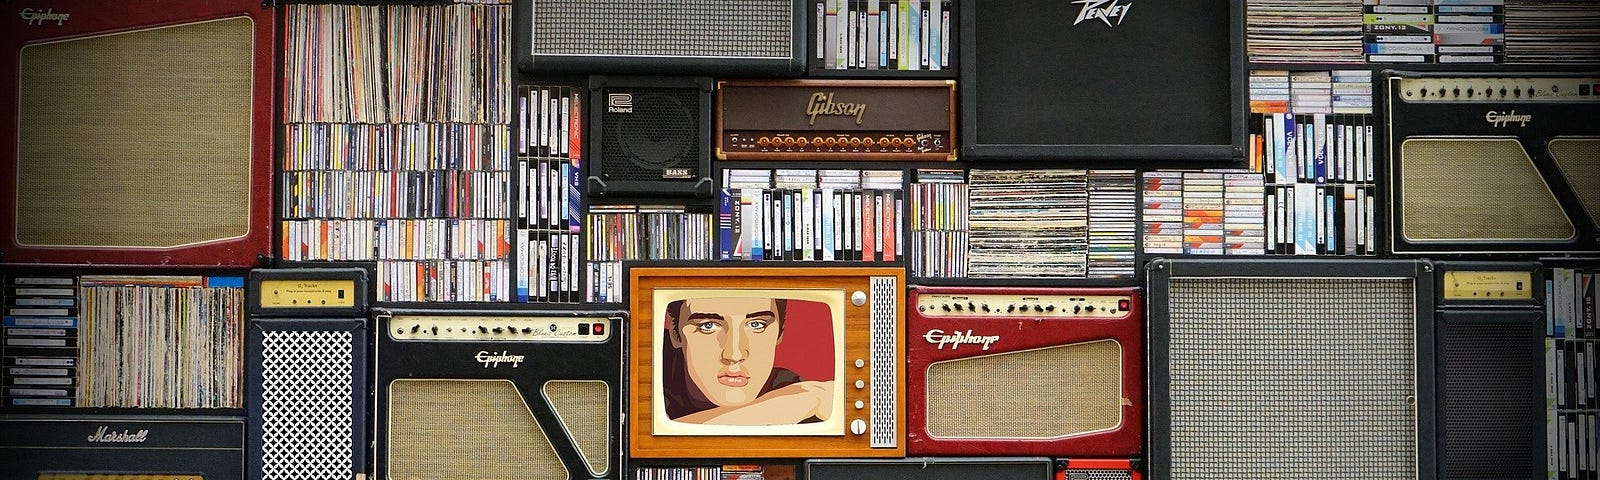 Old amplifiers, televisions and records. One of the televisions has an image of Elvis Presley on it.